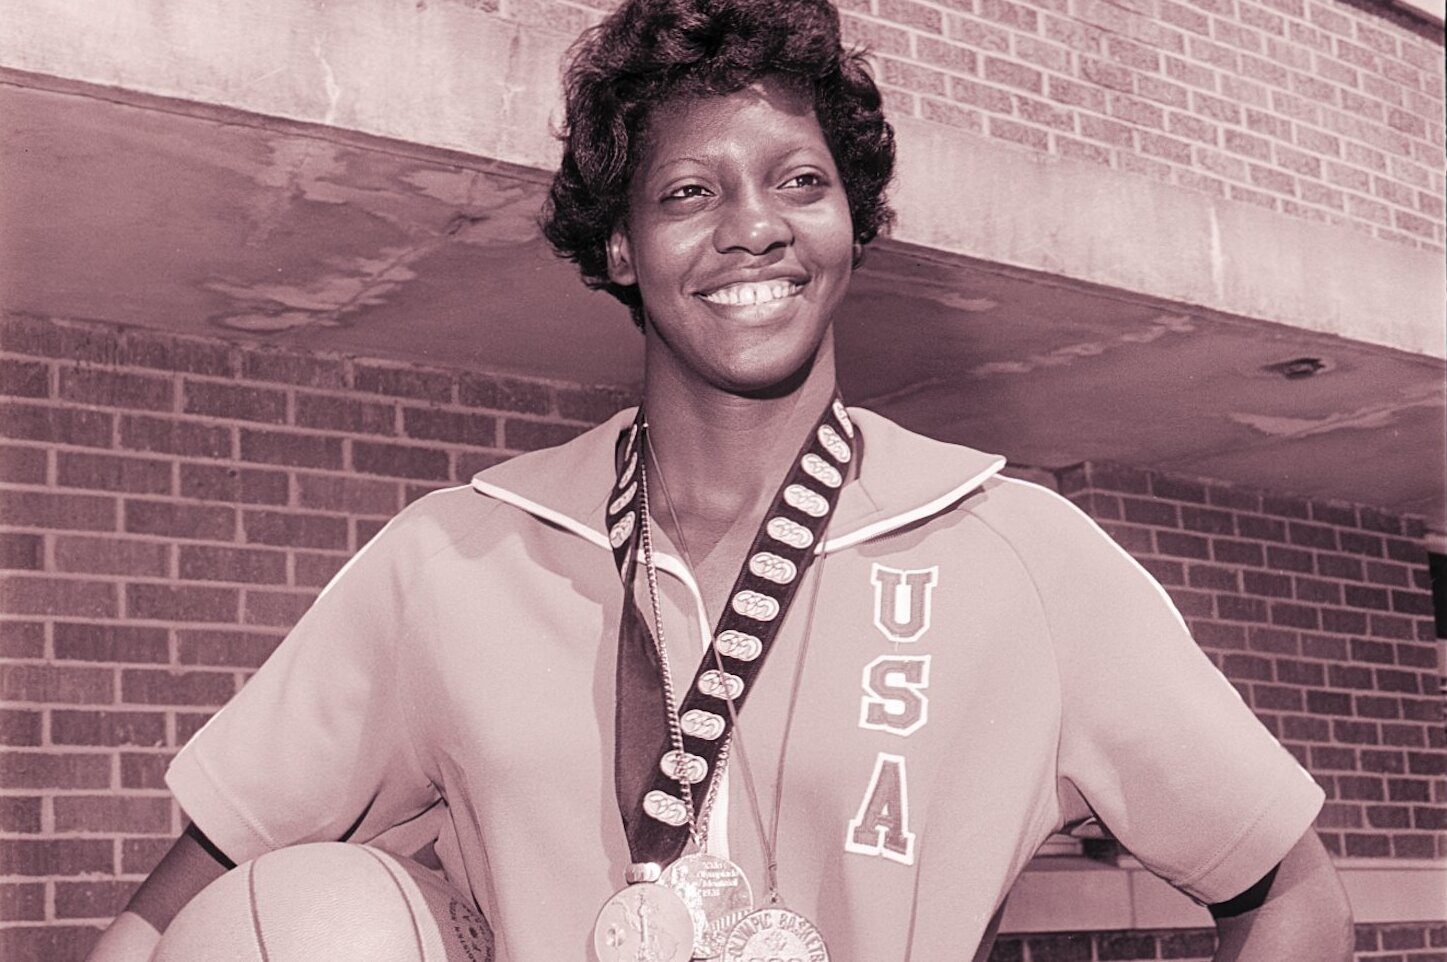 ‘Queen of Basketball’ Lusia Harris dead at 66